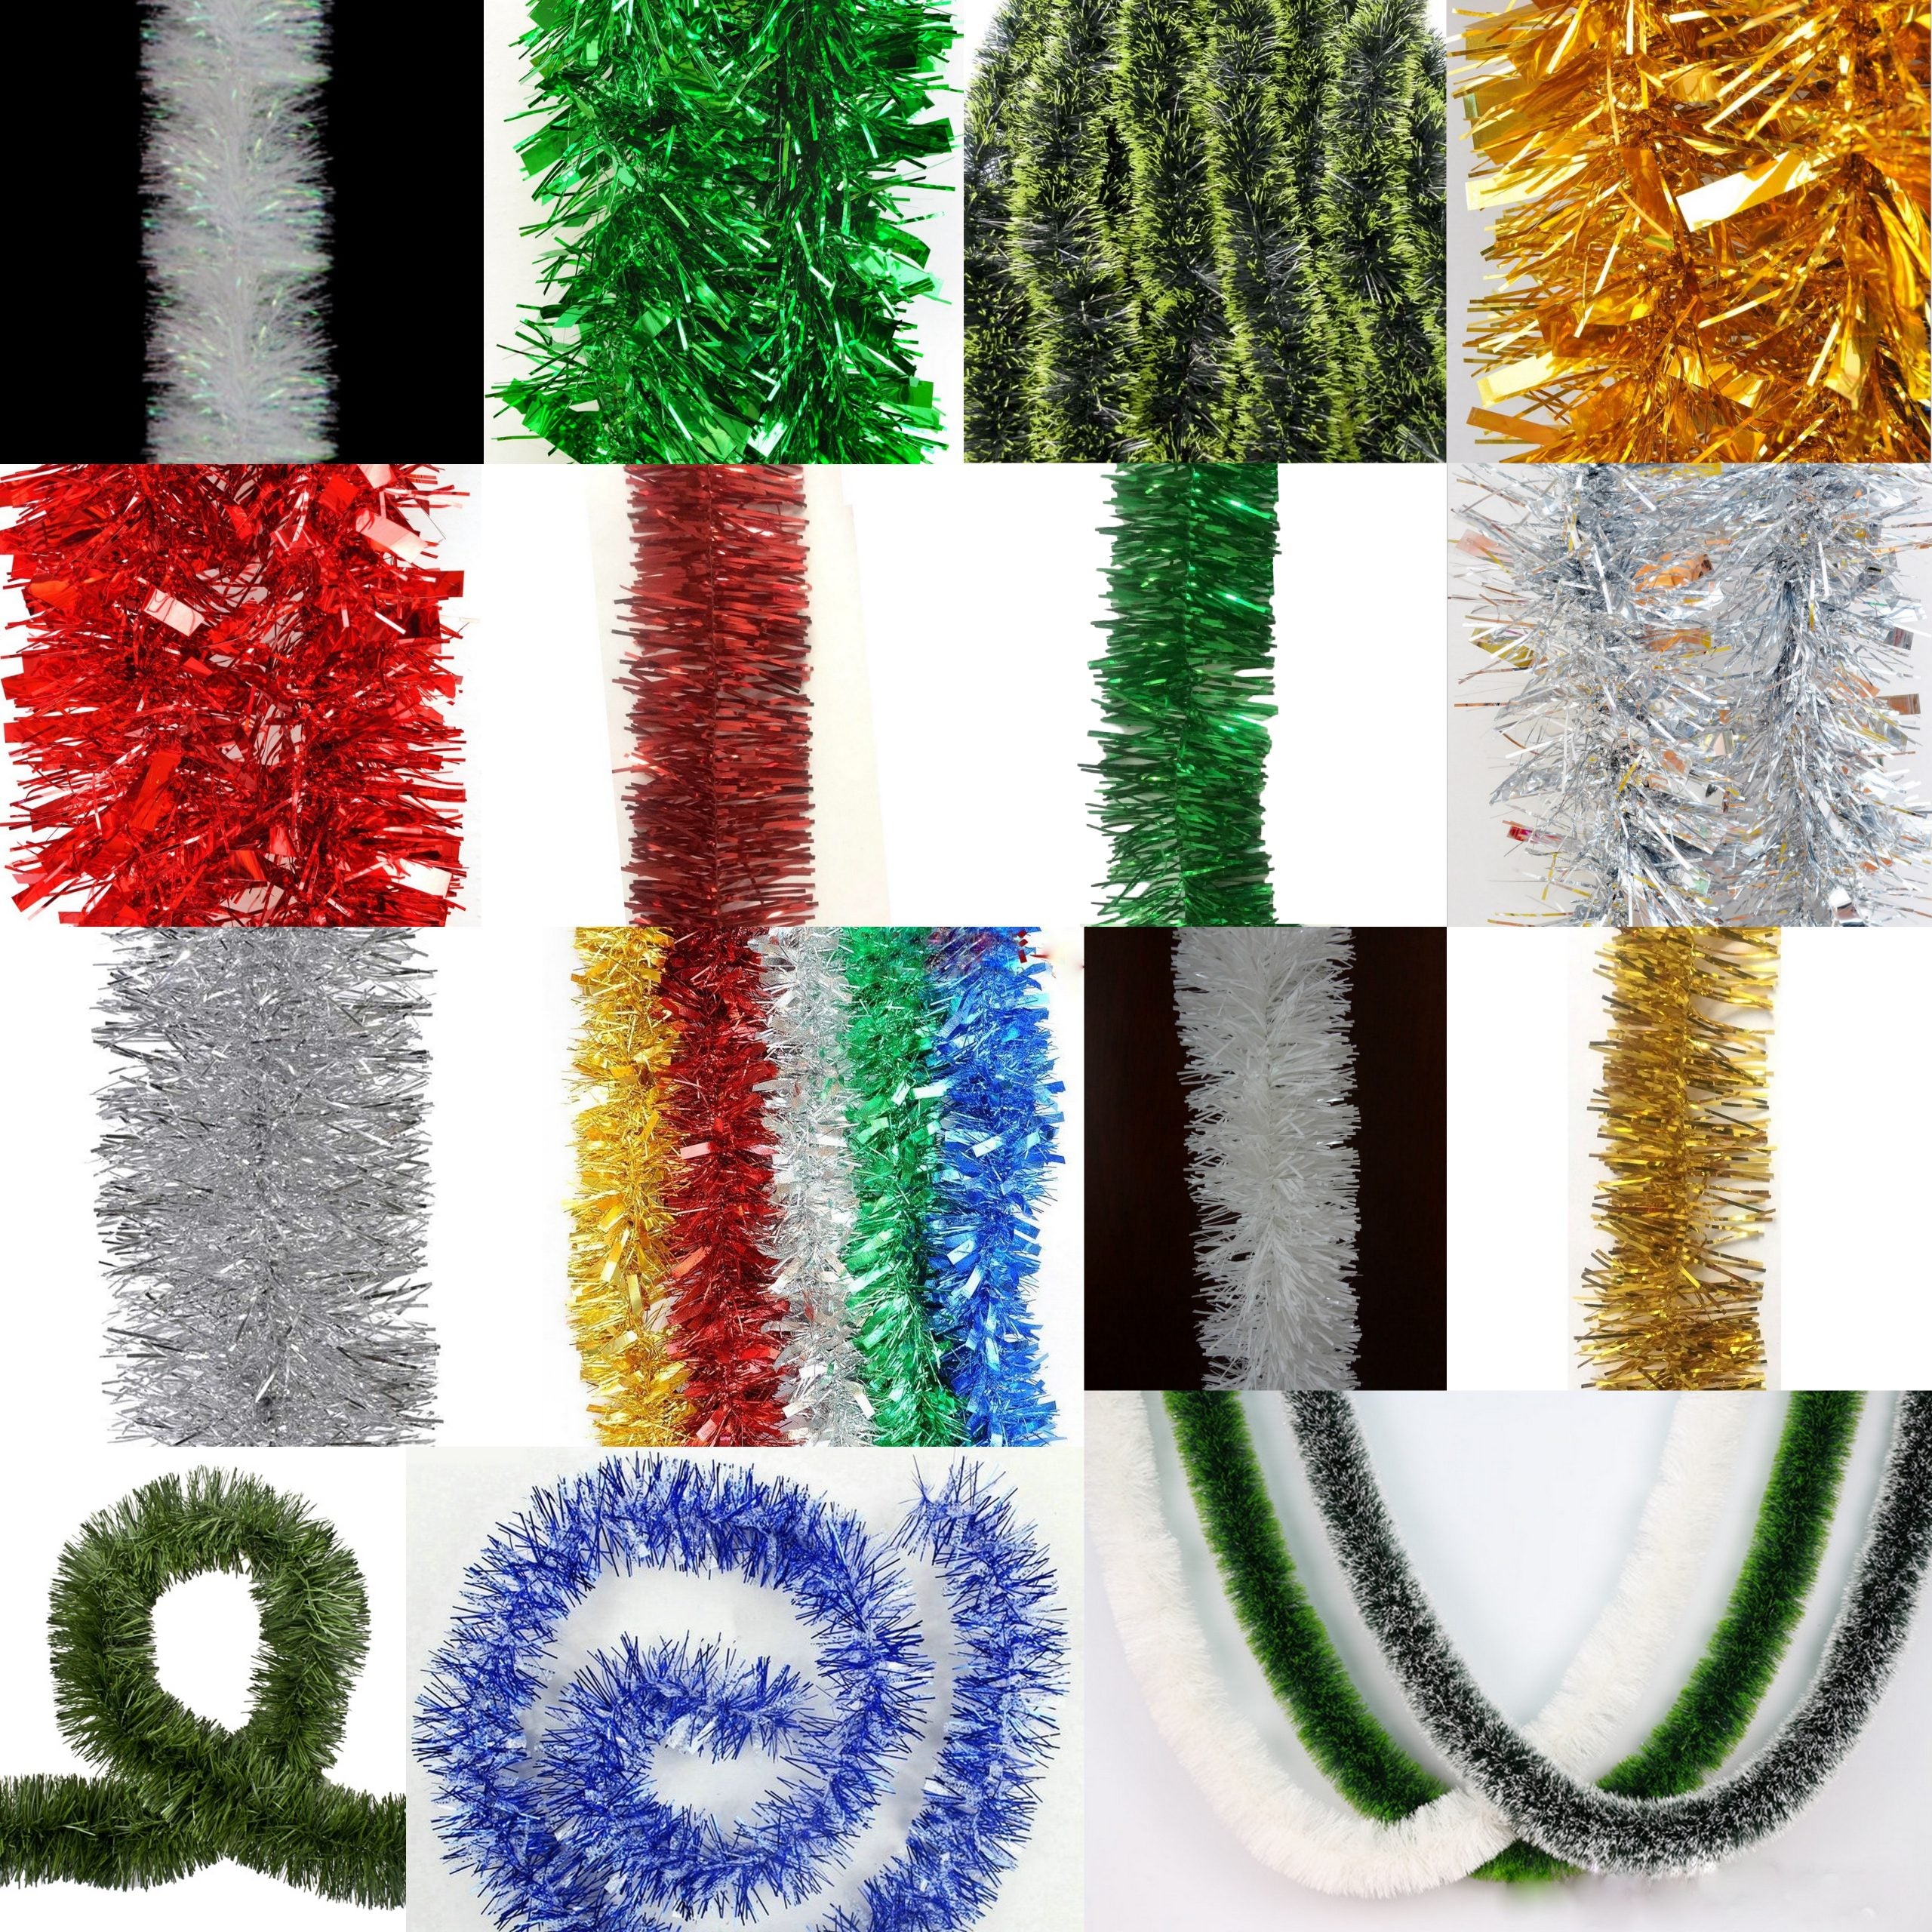 5x 2.5m Christmas Tinsel Xmas Garland Sparkly Snowflake Party Natural Home Décor, Bells (Green) - SILBERSHELL